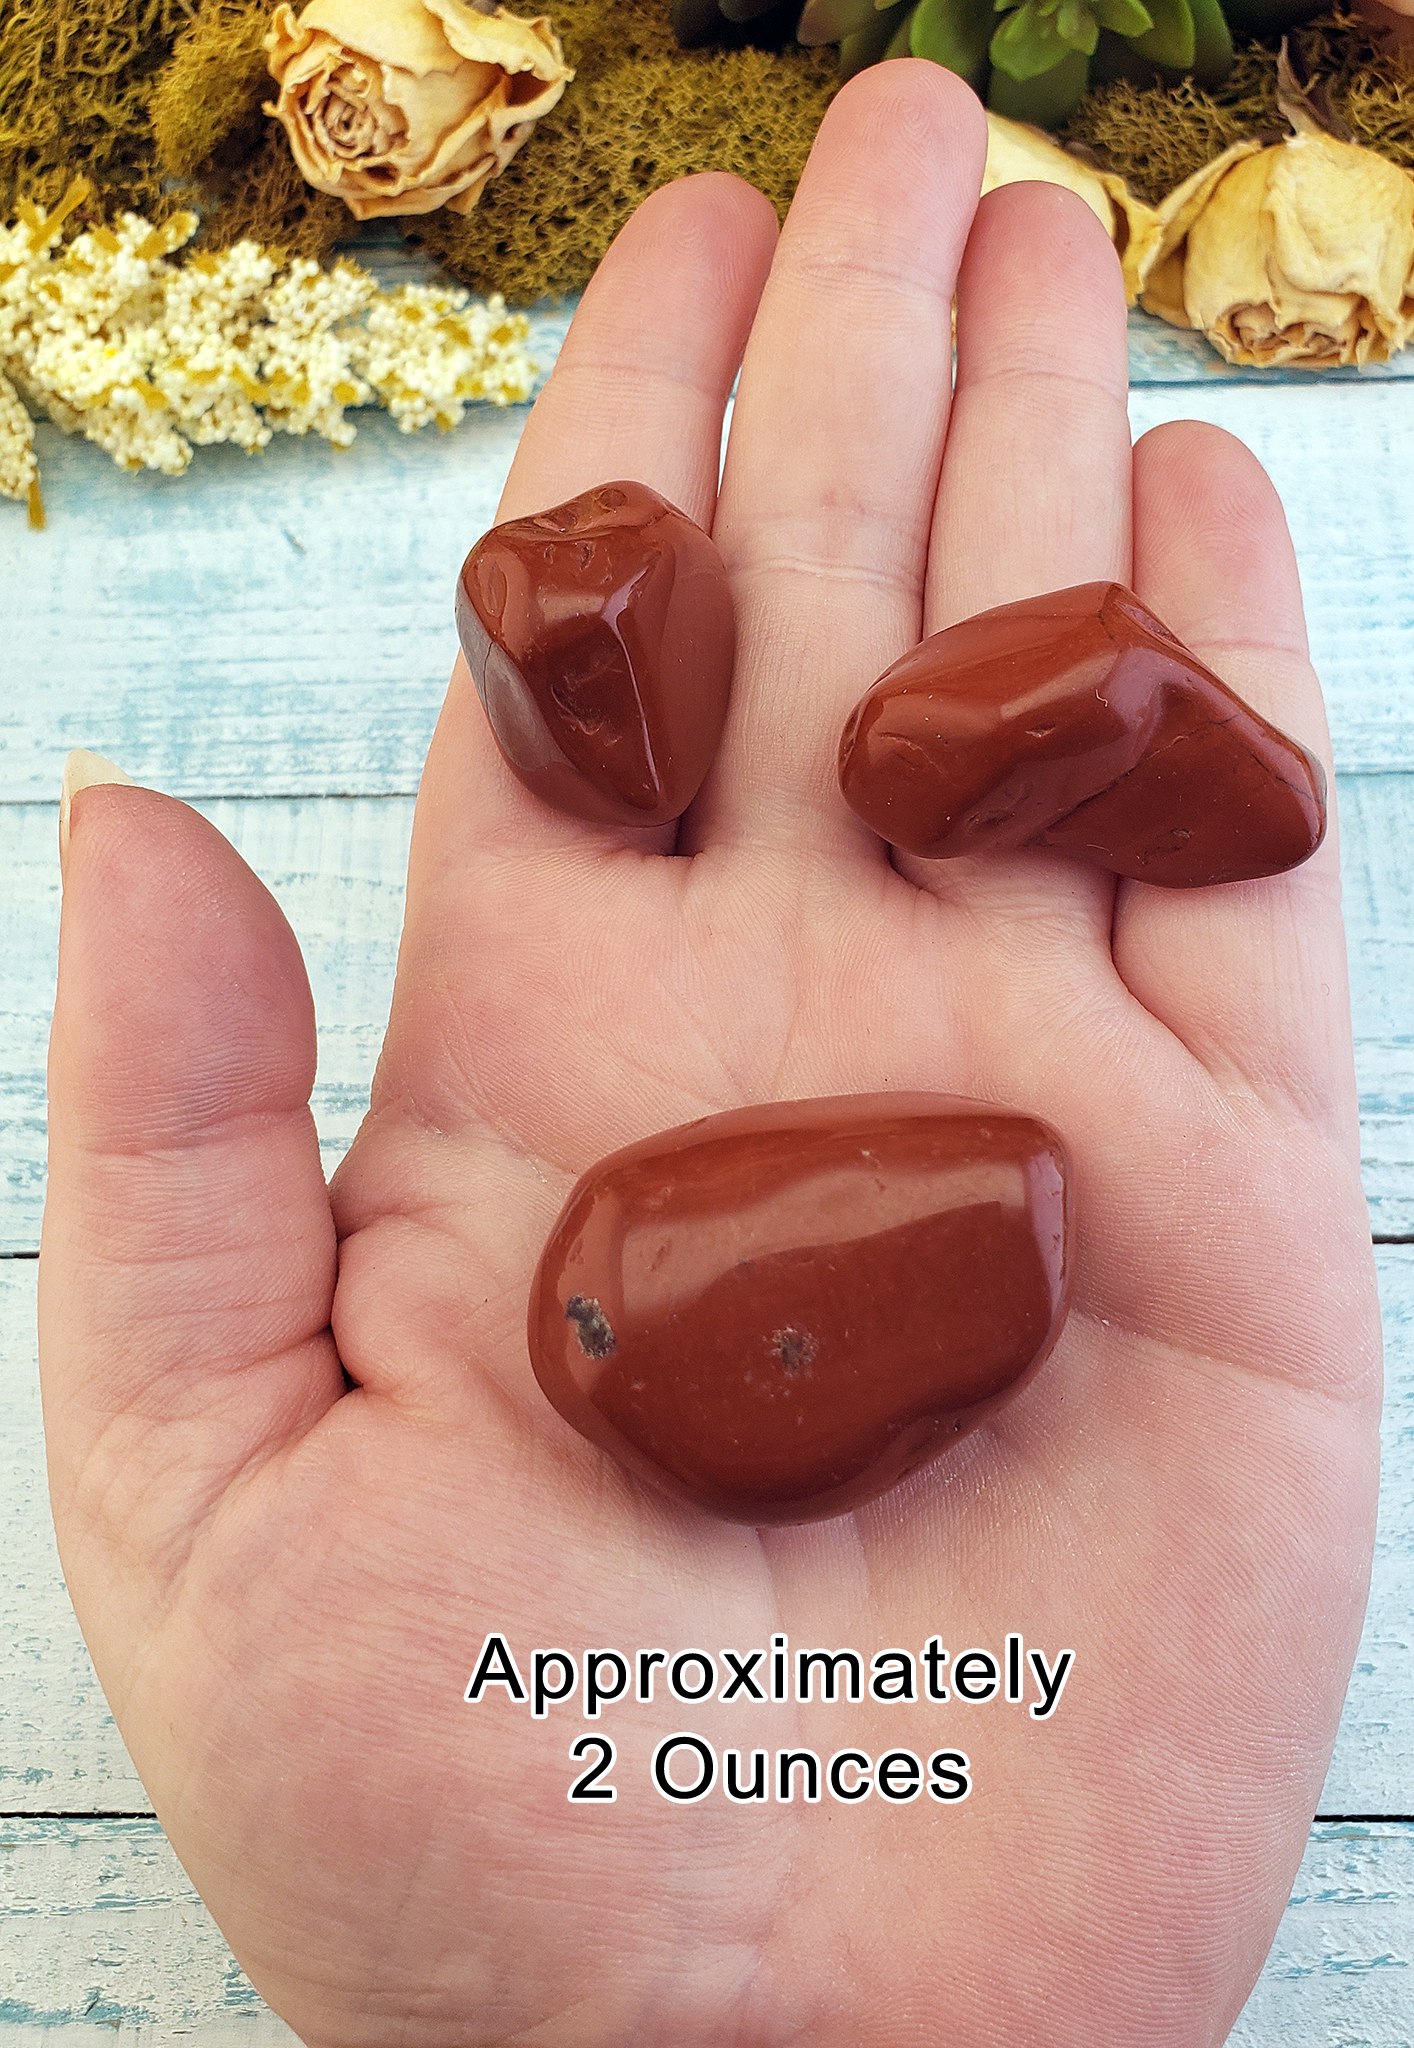 Red Jasper Natural Tumbled Gemstone - 2 Ounces in Hand